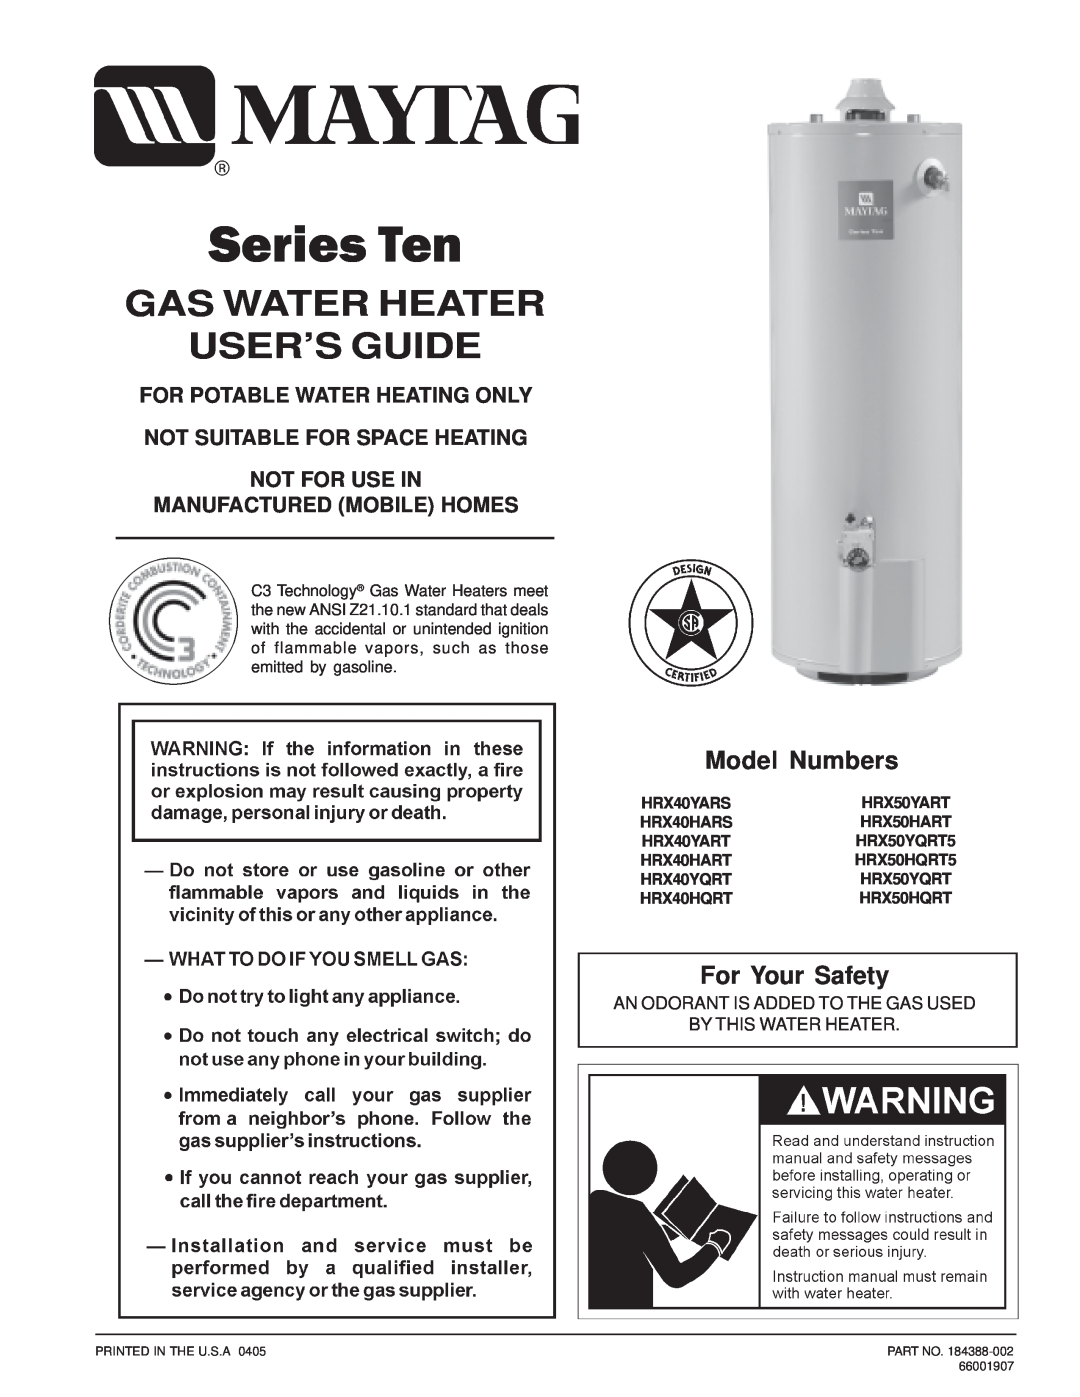 Maytag HRX40YQRT manual Model Numbers, For Your Safety, Series Ten, Gas Water Heater User’S Guide, HRX40YARS, HRX50YART 